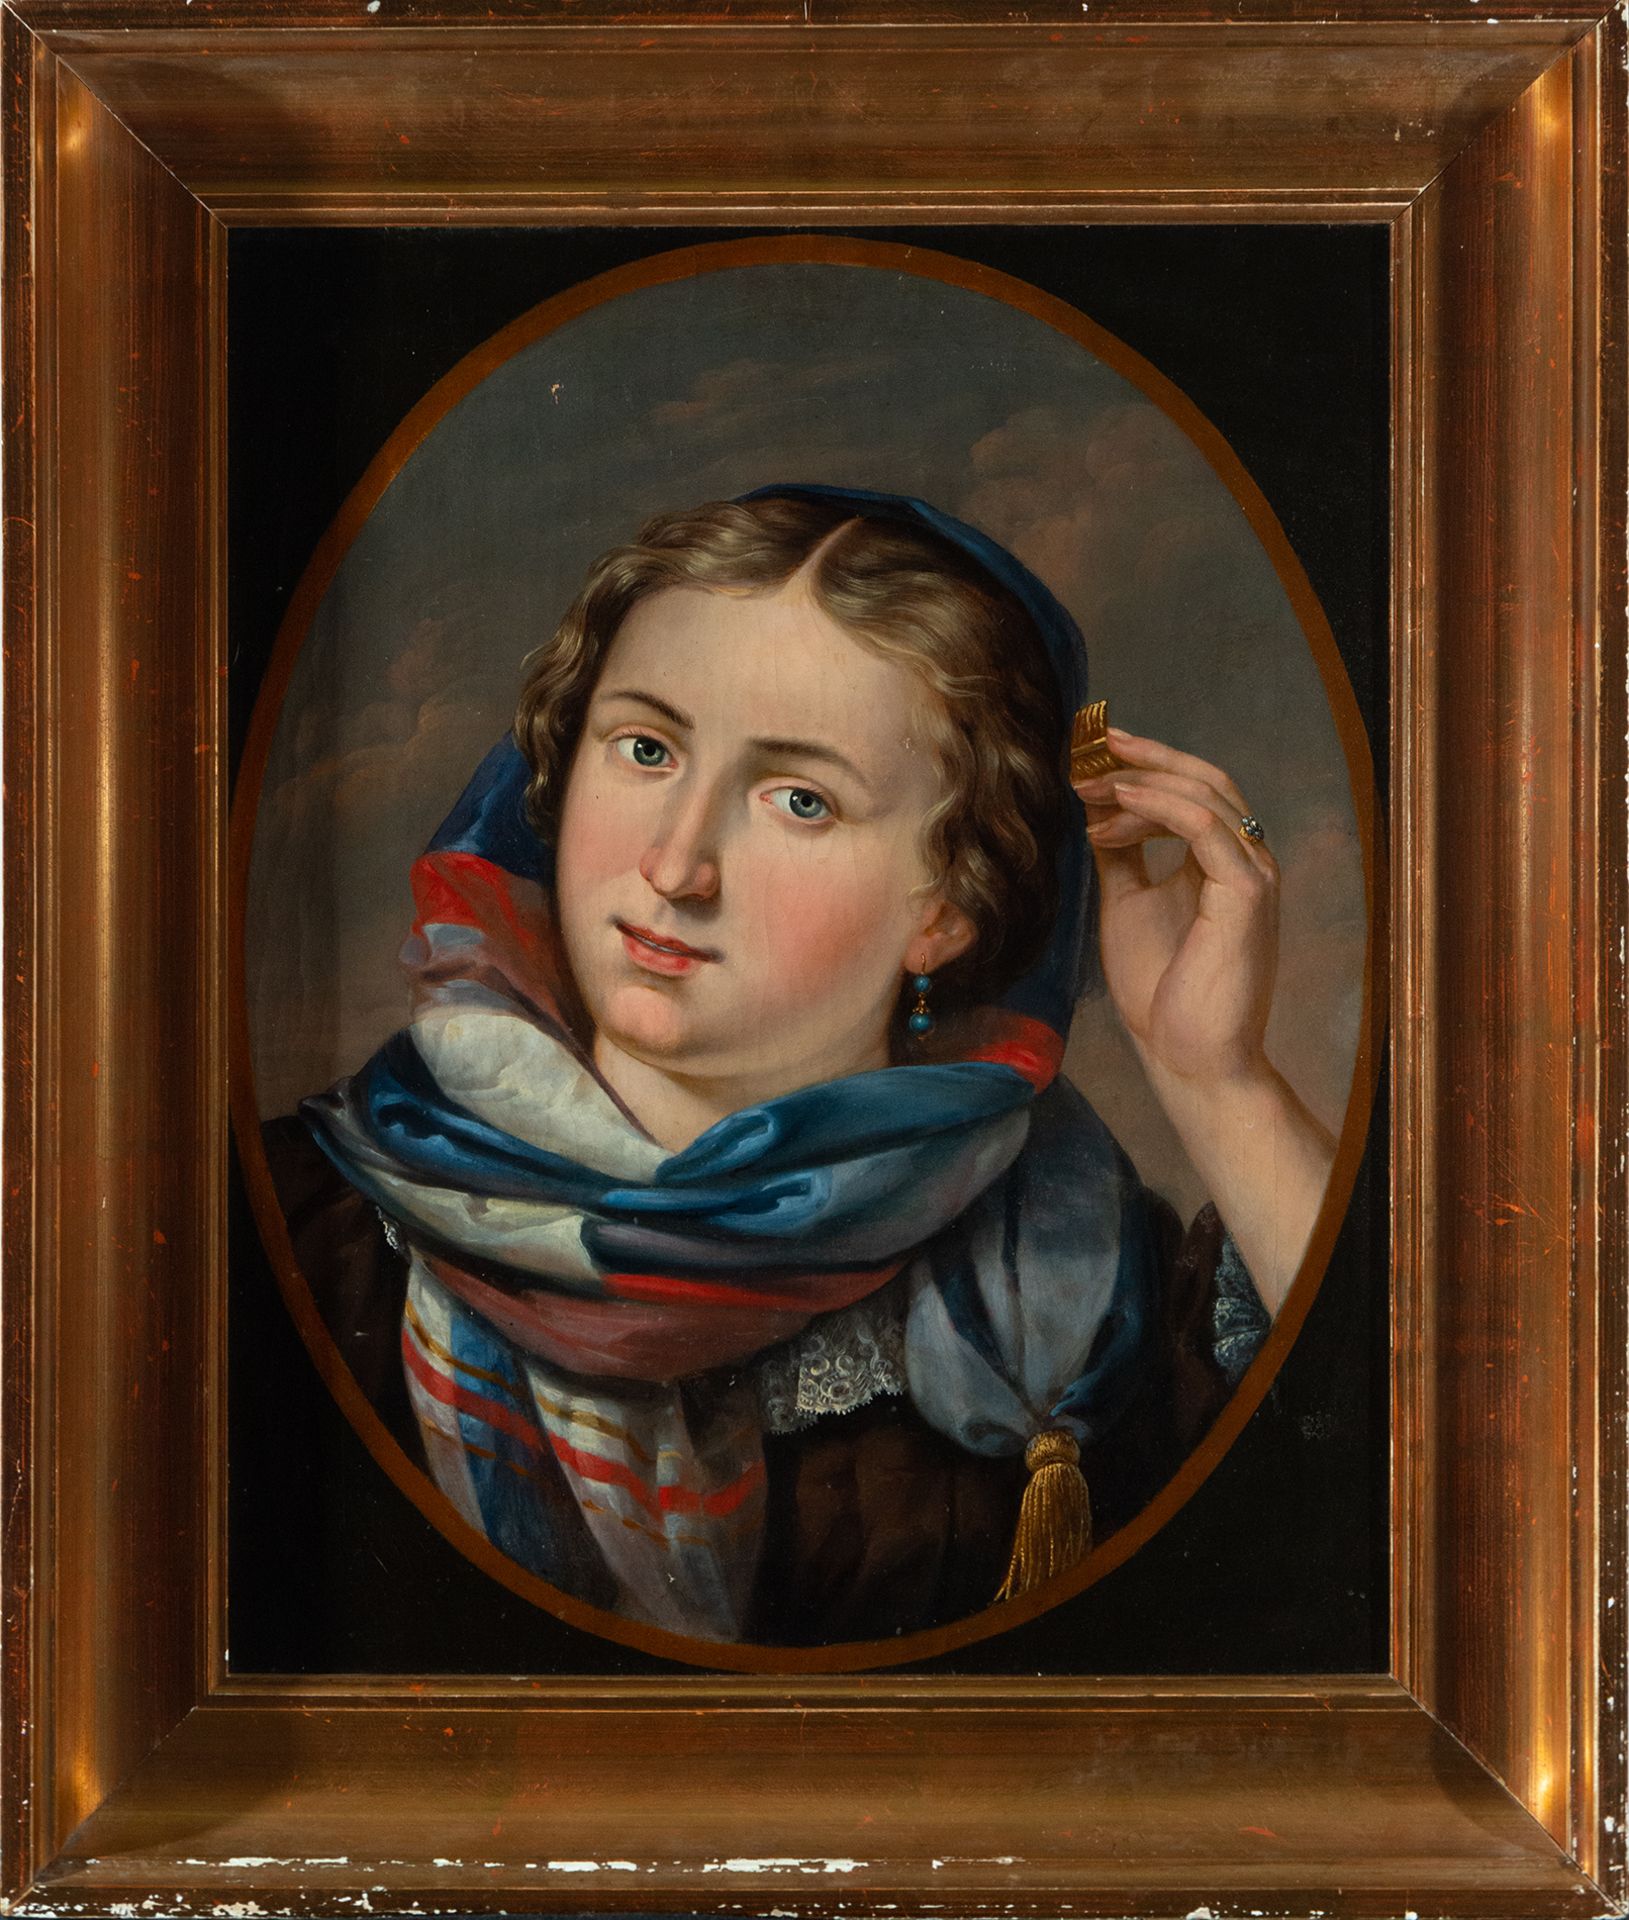 Oval Portrait of a Young Lady, Italian Neoclassical school, early 19th century